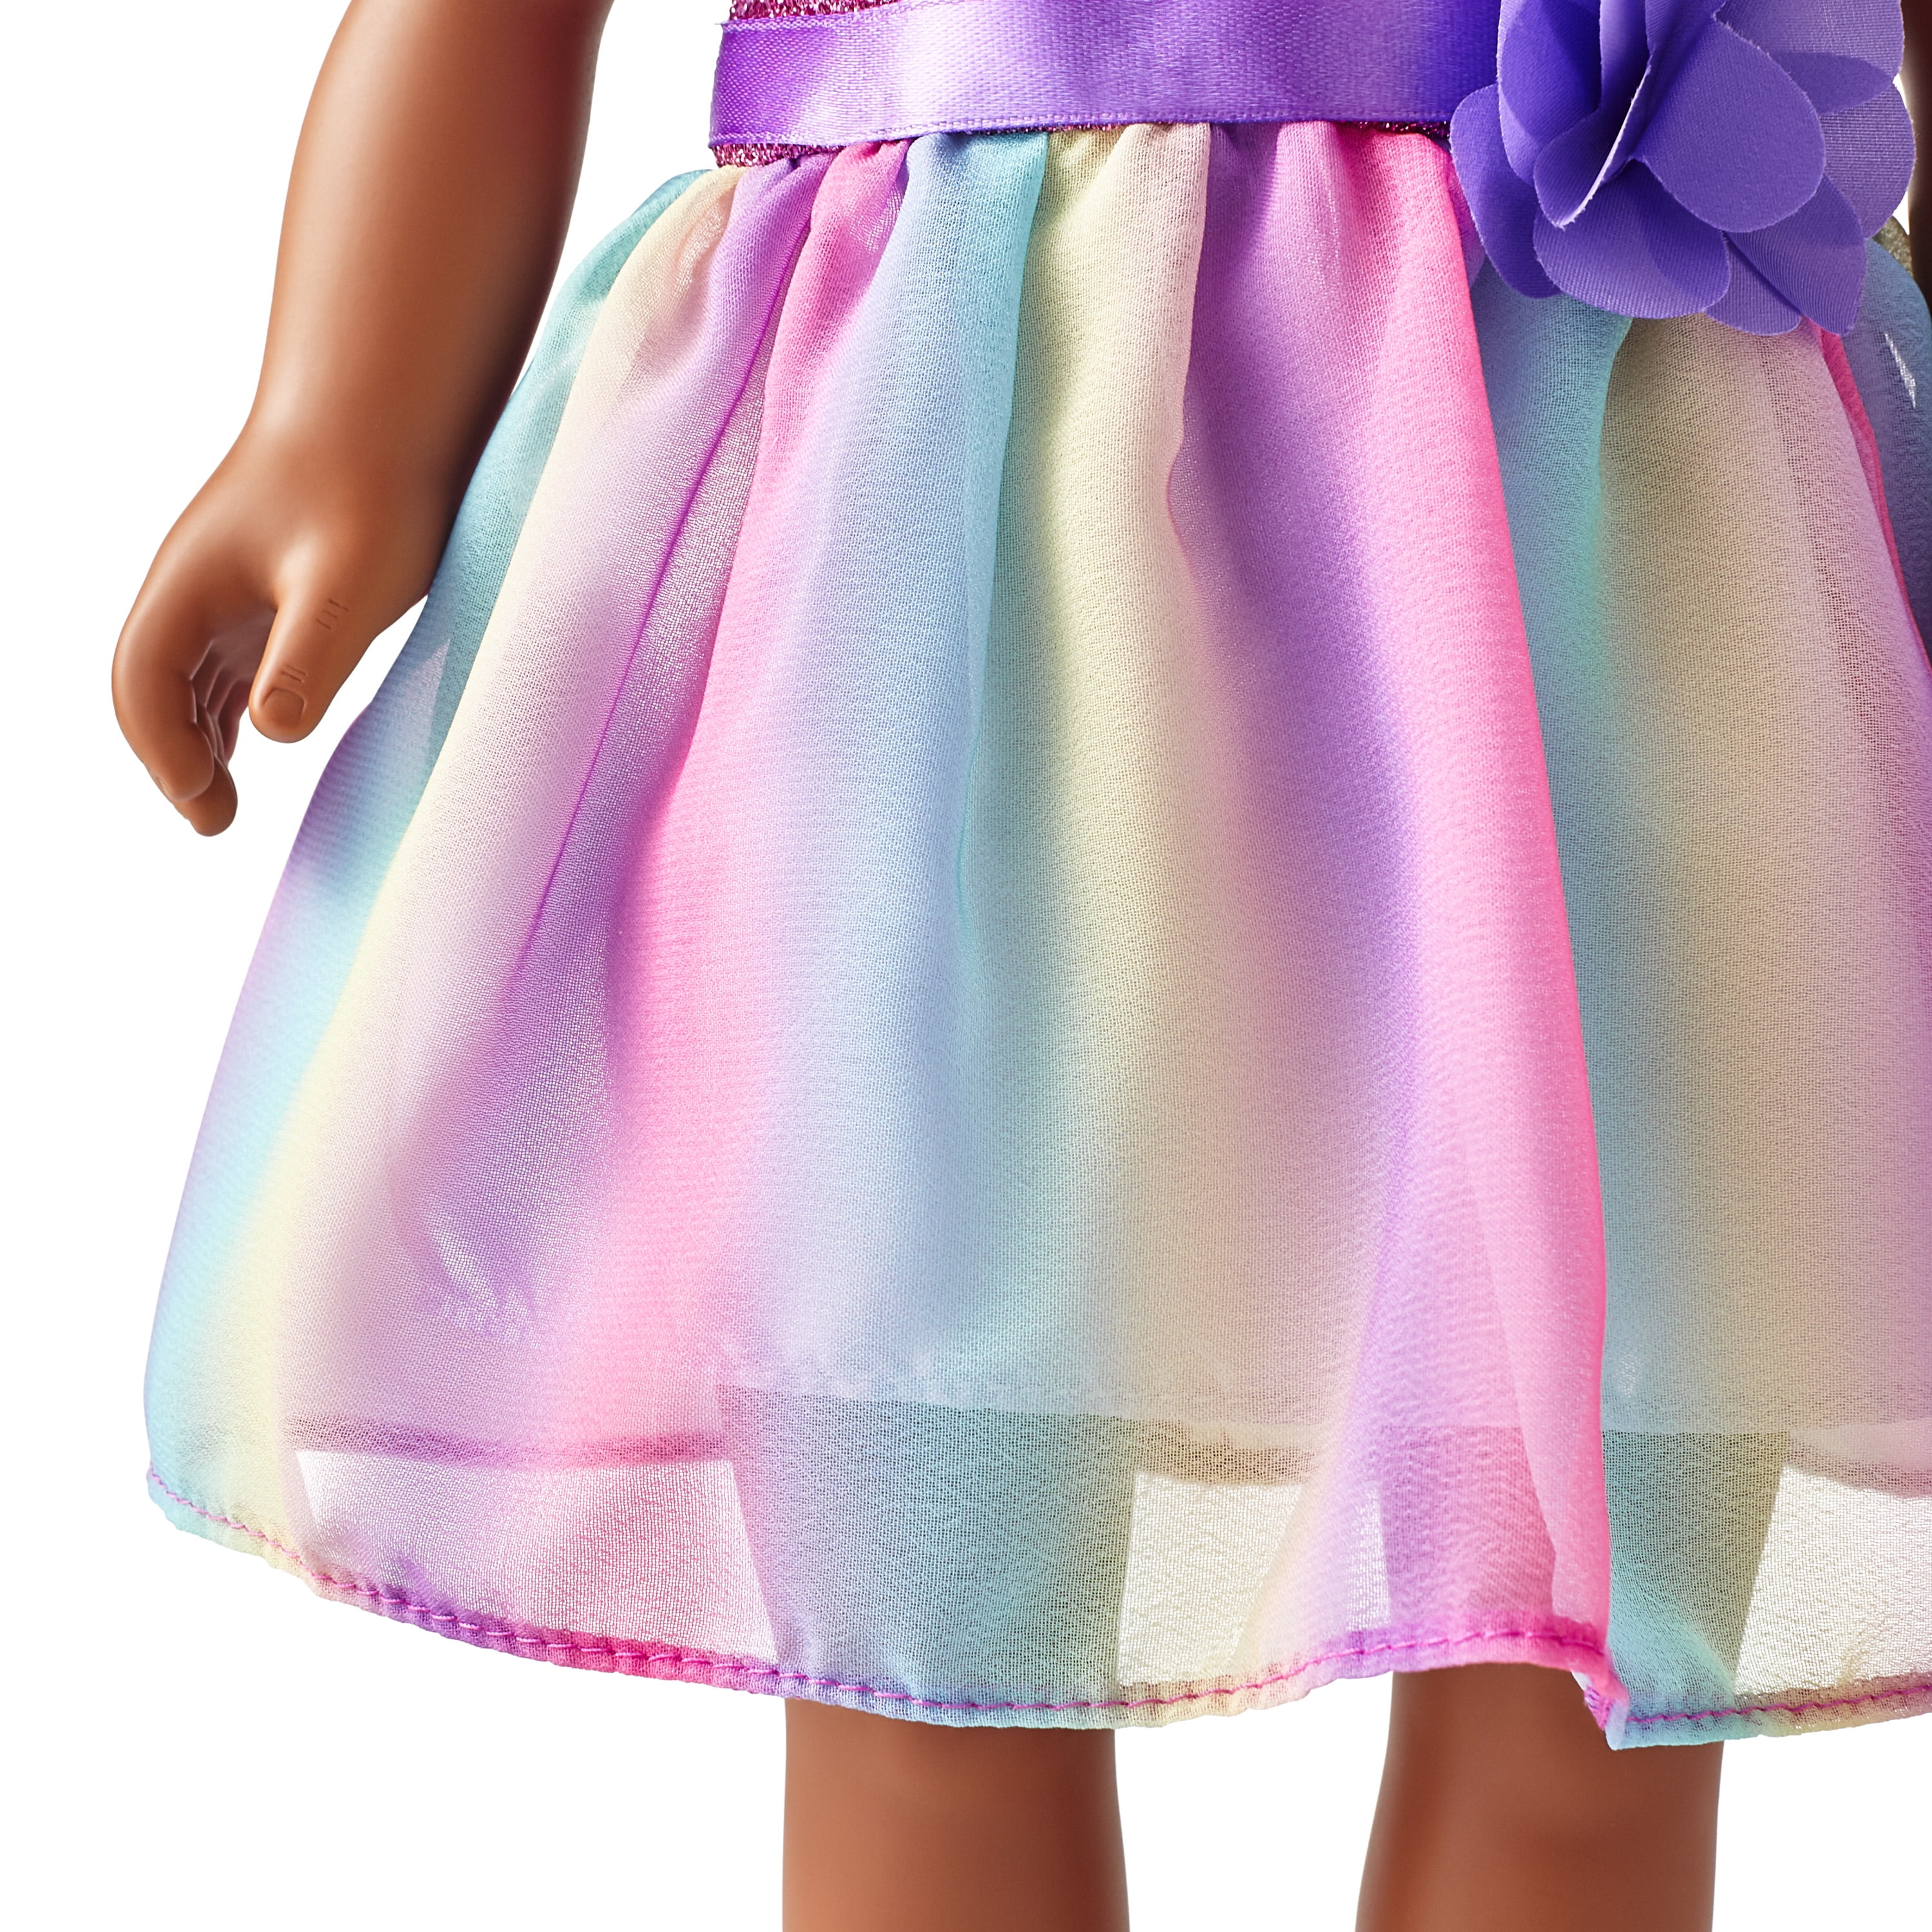 My Life As Lilac & Soft Blue Dress for 18” Doll 